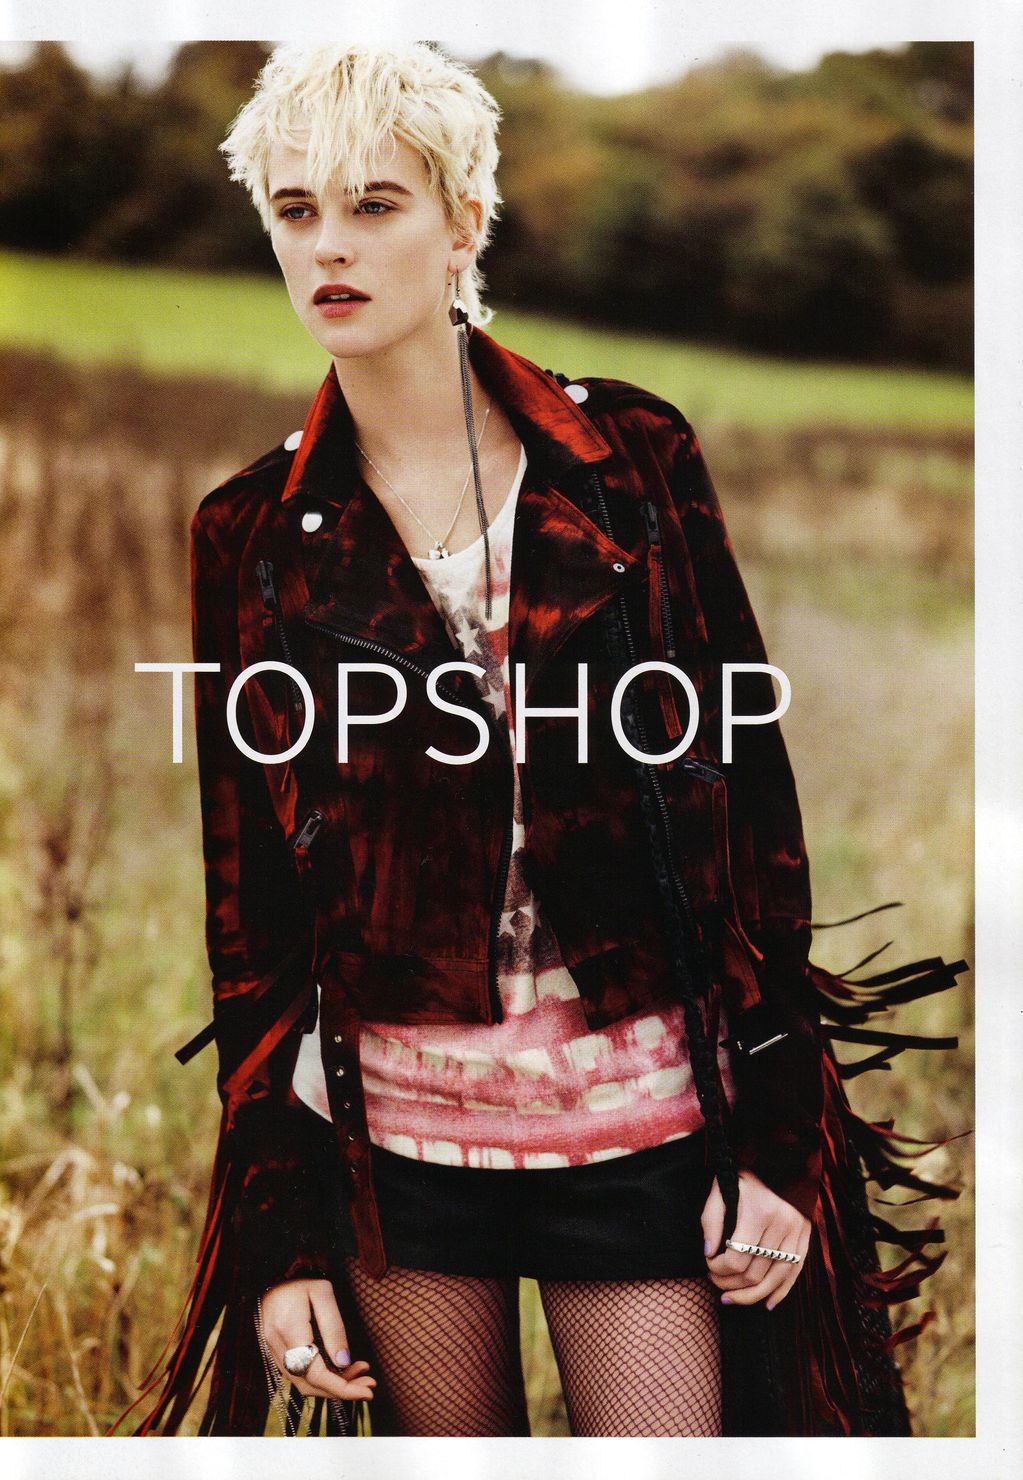 Image result for topshop clothing advertising